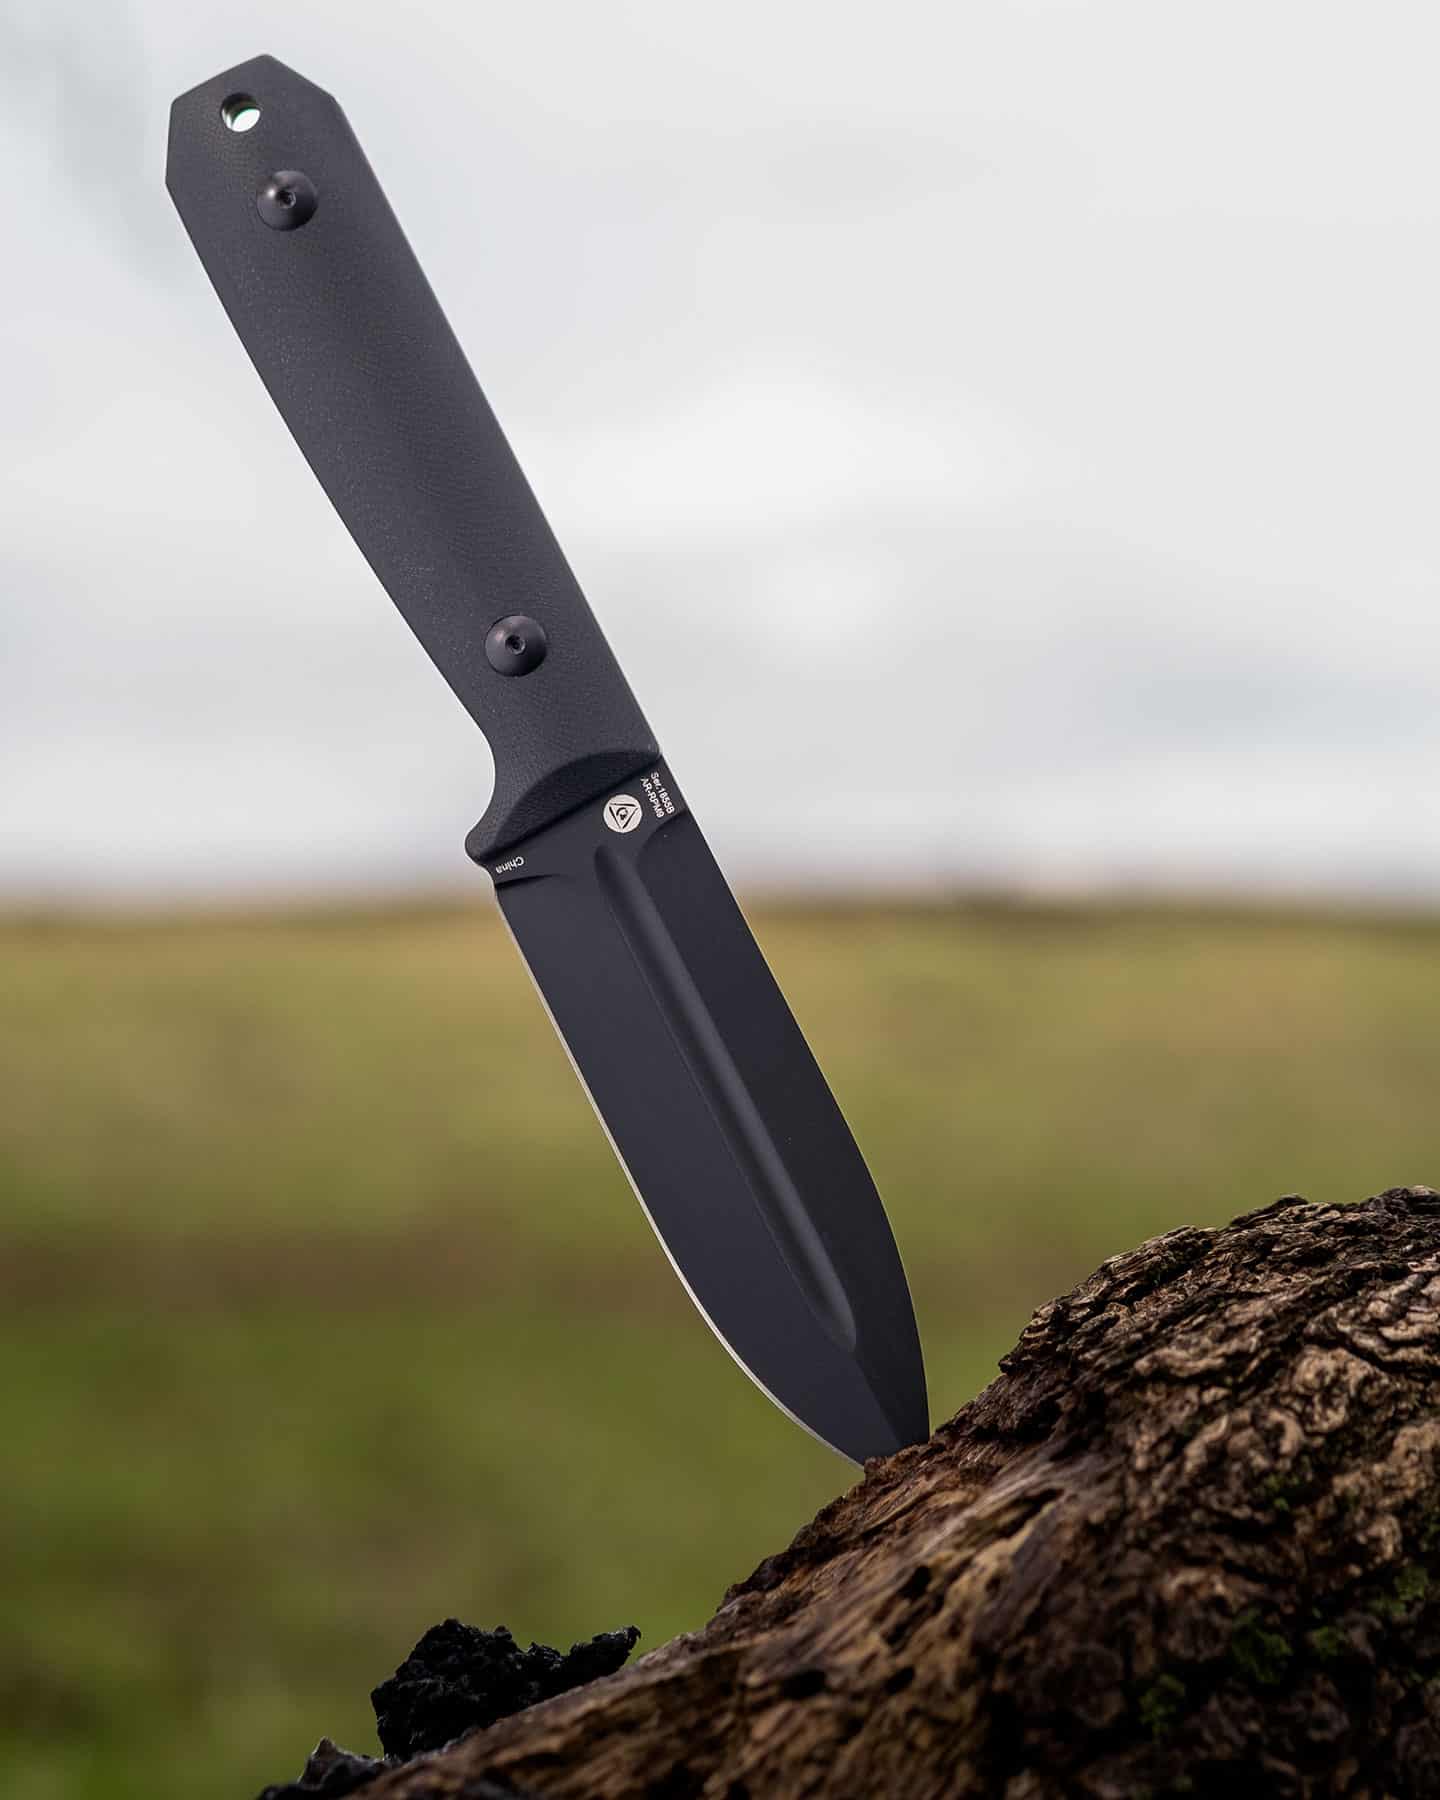 The Joe Flowers designed Artisan Wreckhart is a tactical knife with bushcraft asperations.